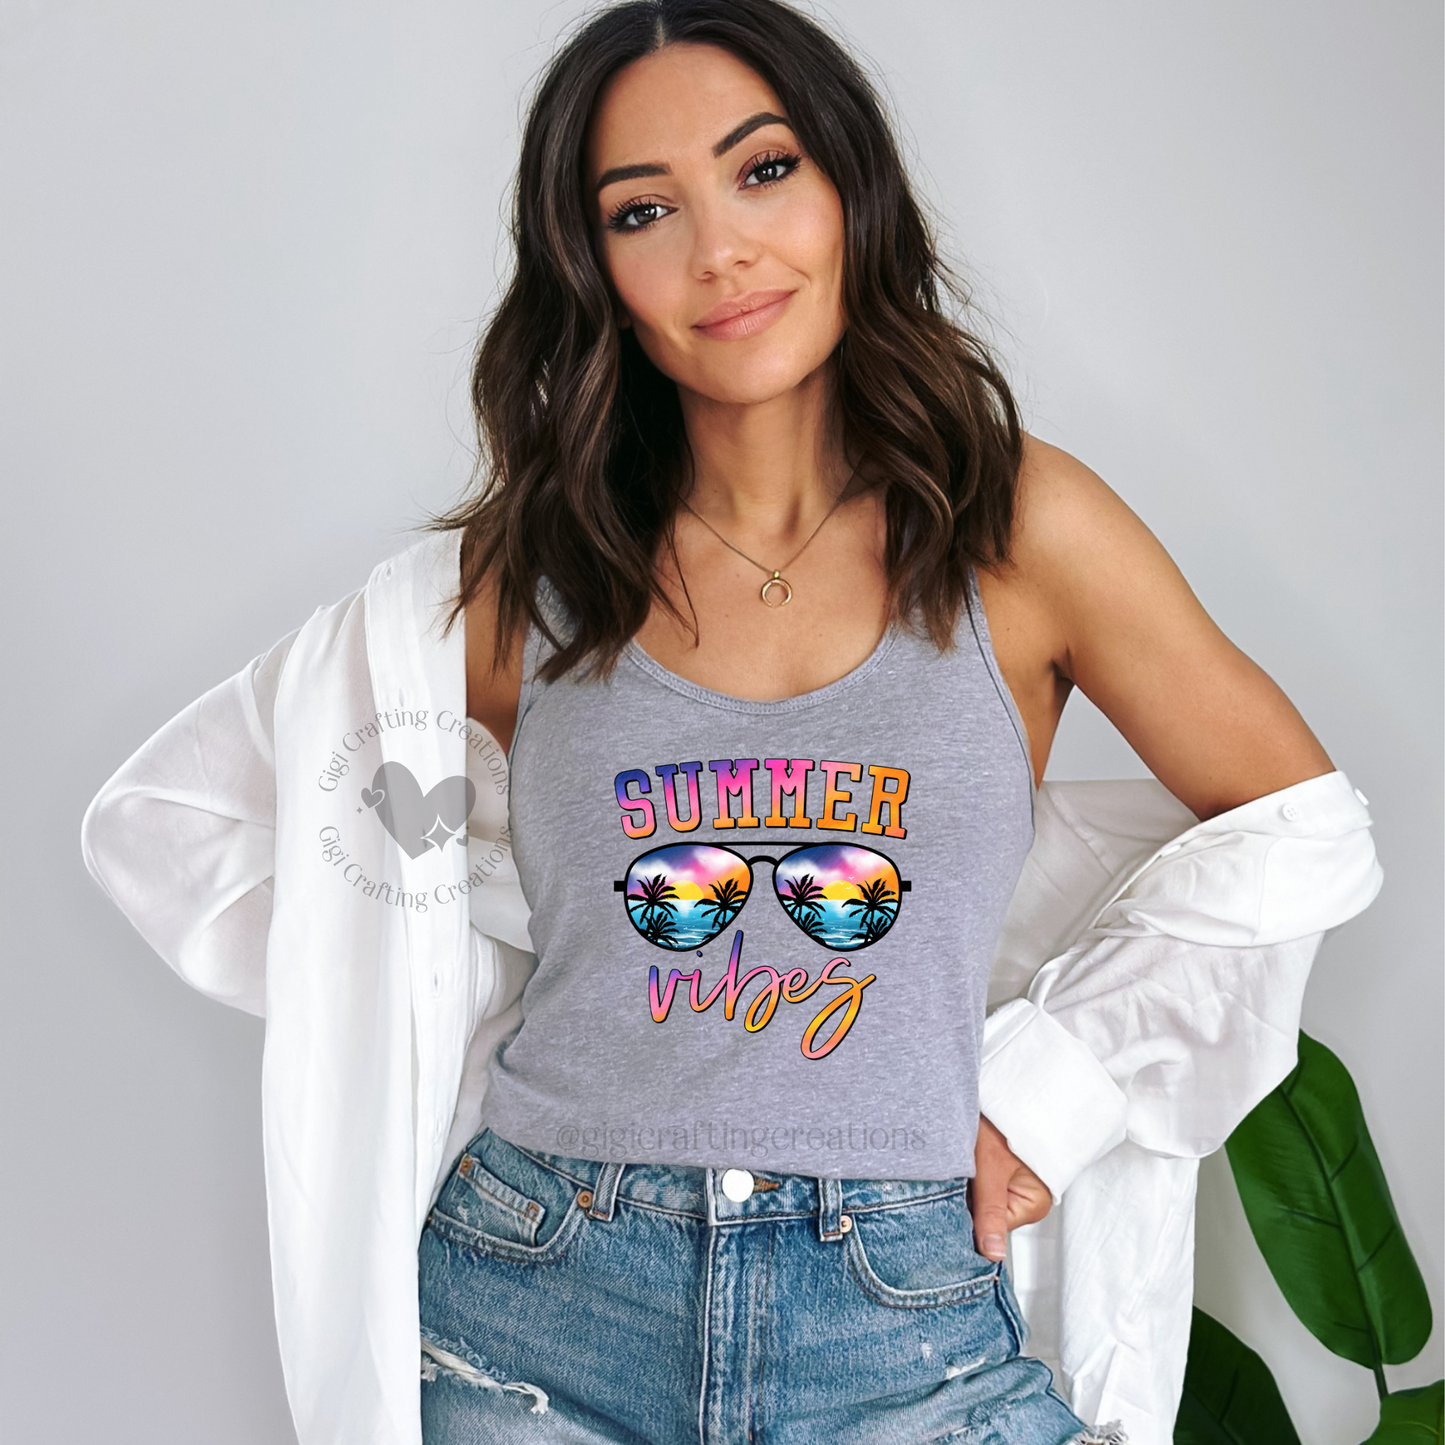 Summer Vibes Tropical Tank Top